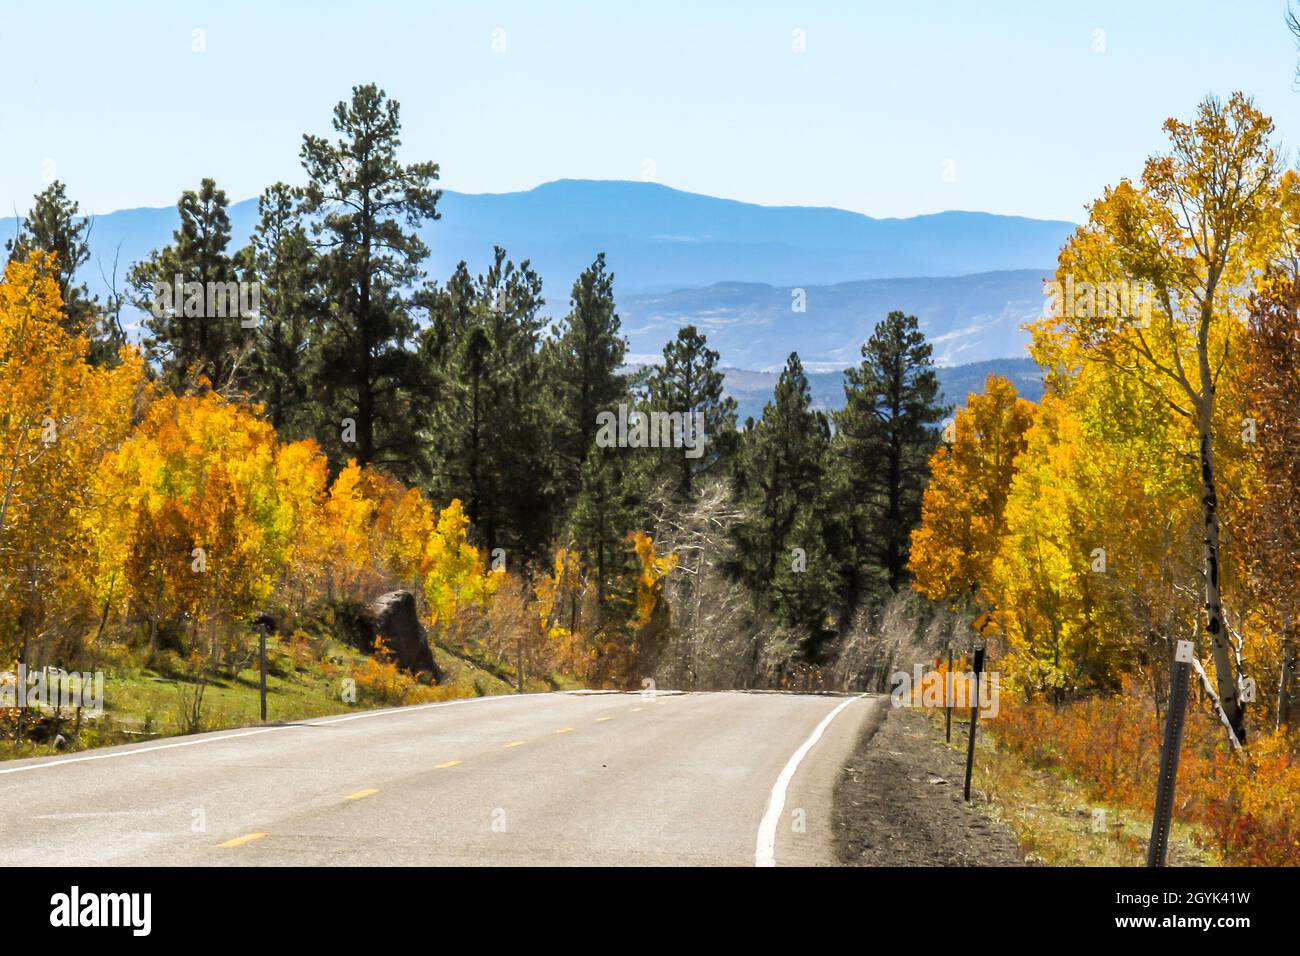 Highway lined with Aspen in their golden fall colors and tall fir and pine trees, in the Dixie National forest, Utah, USA Stock Photo